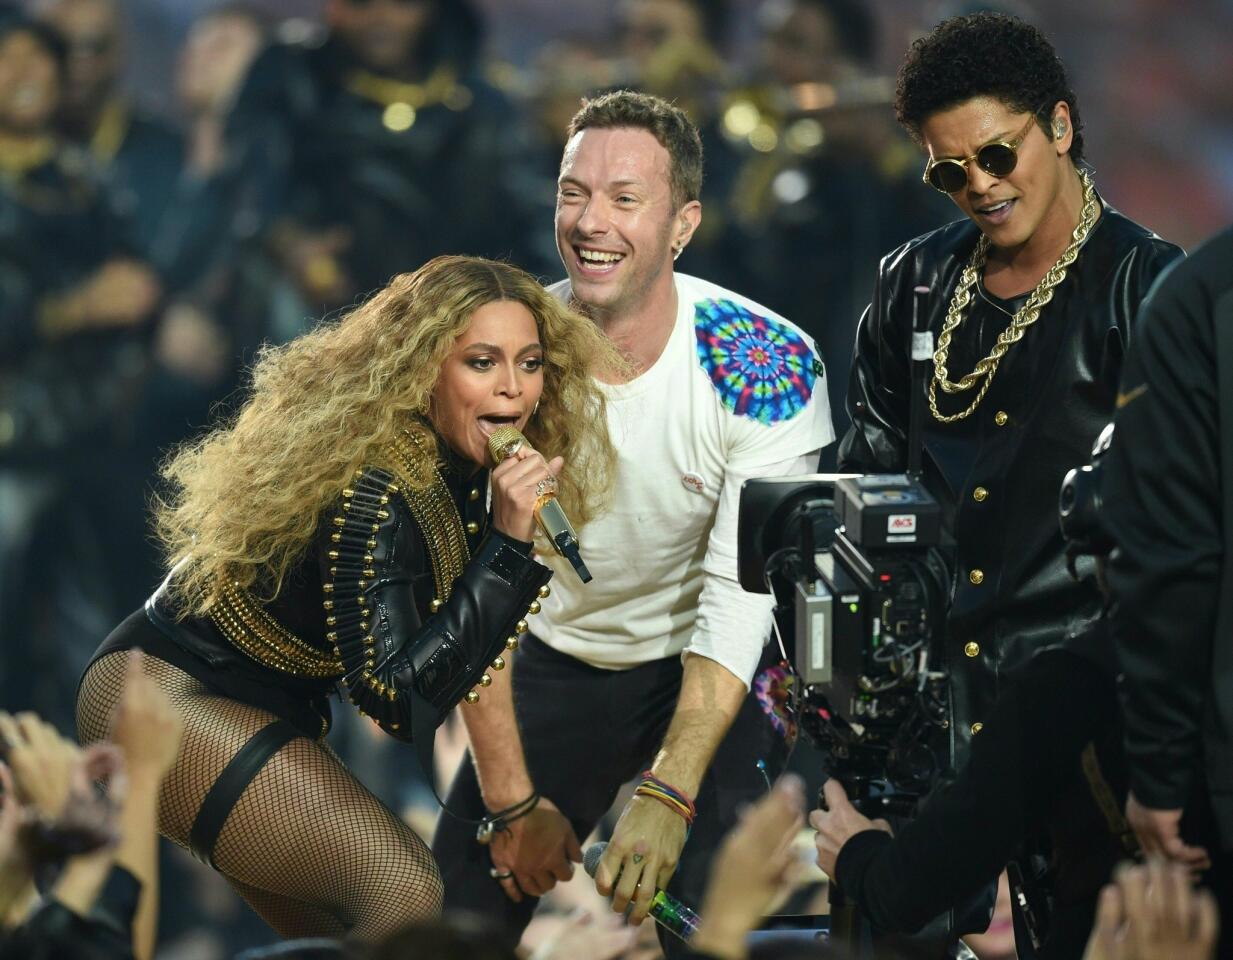 Beyonce, Chris Martin and Bruno Mars perform during Super Bowl 50 between the Carolina Panthers and the Denver Broncos at Levi's Stadium in Santa Clara, California, on February 7, 2016. TIMOTHY A. CLARY/AFP/Getty Images